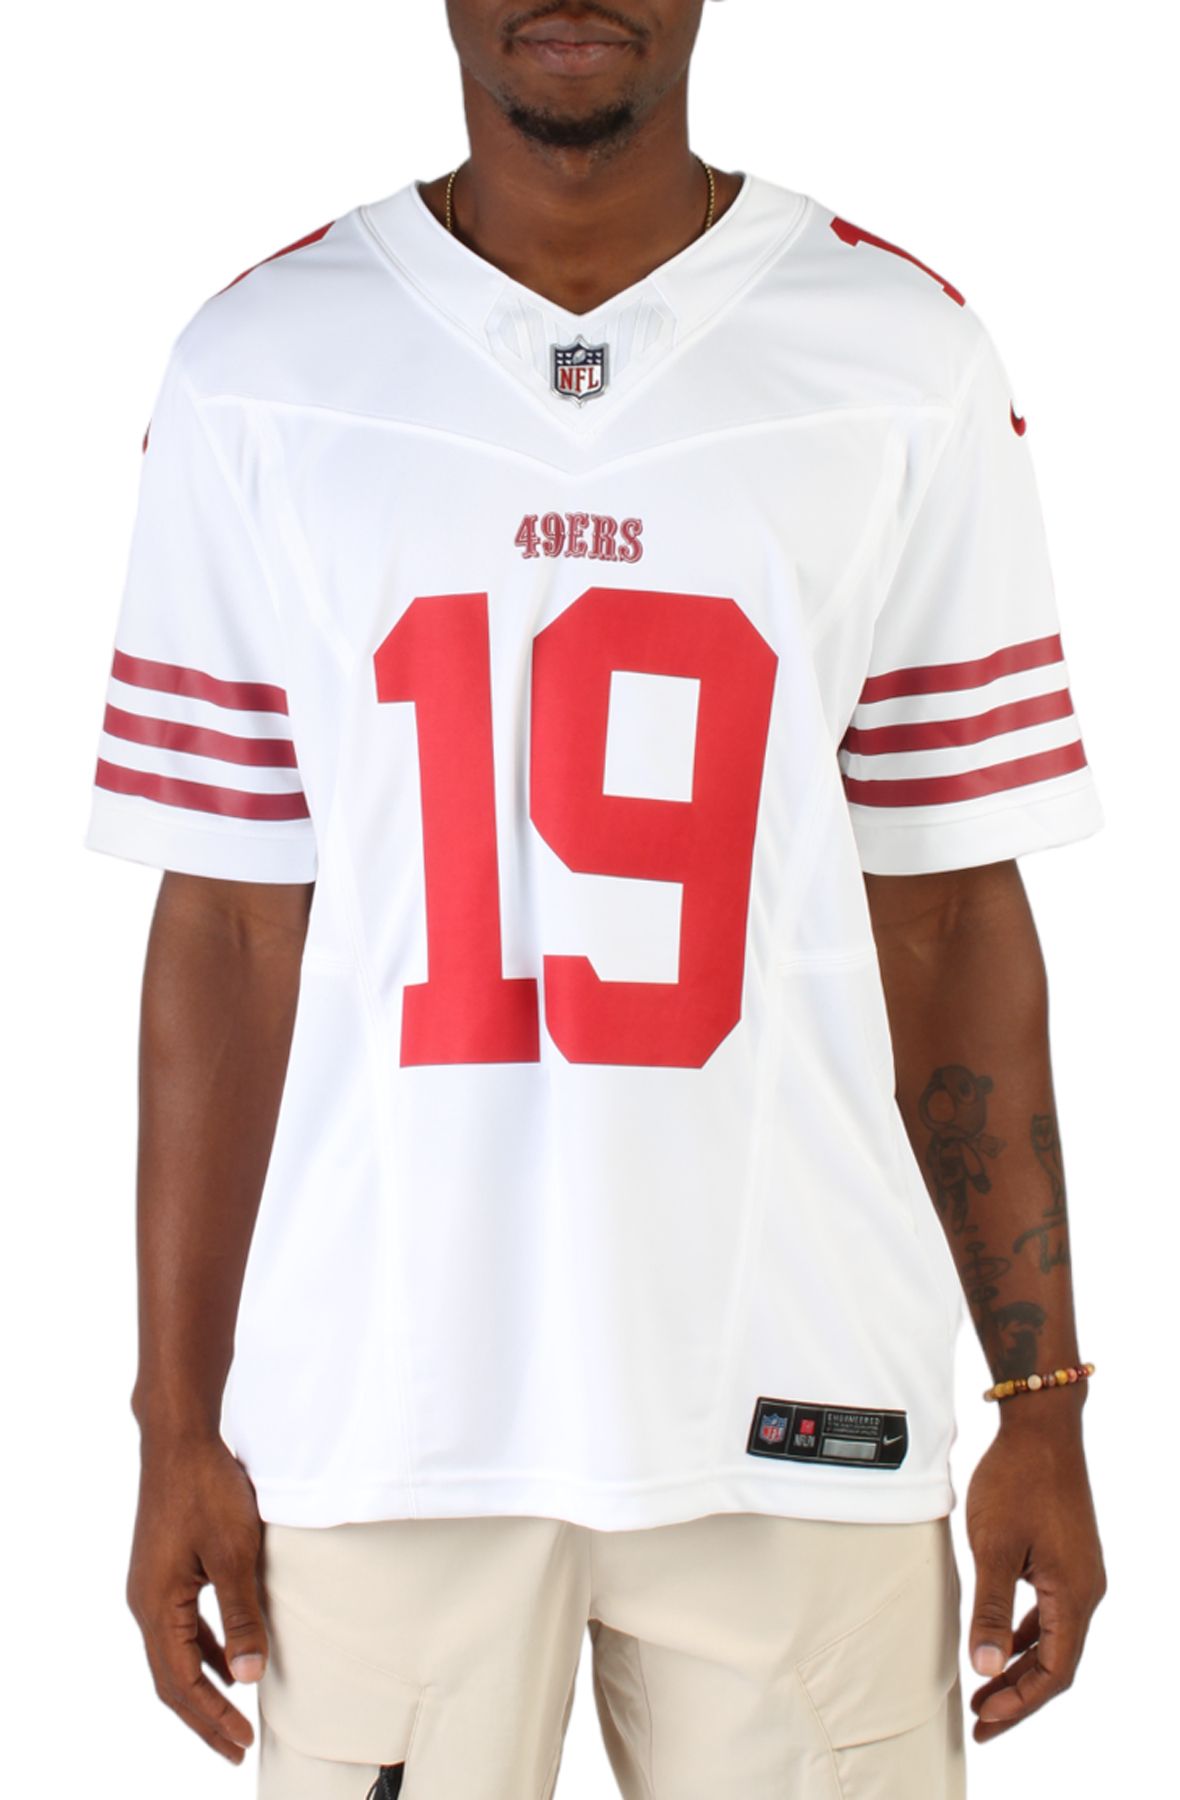 where can i buy 49ers jersey